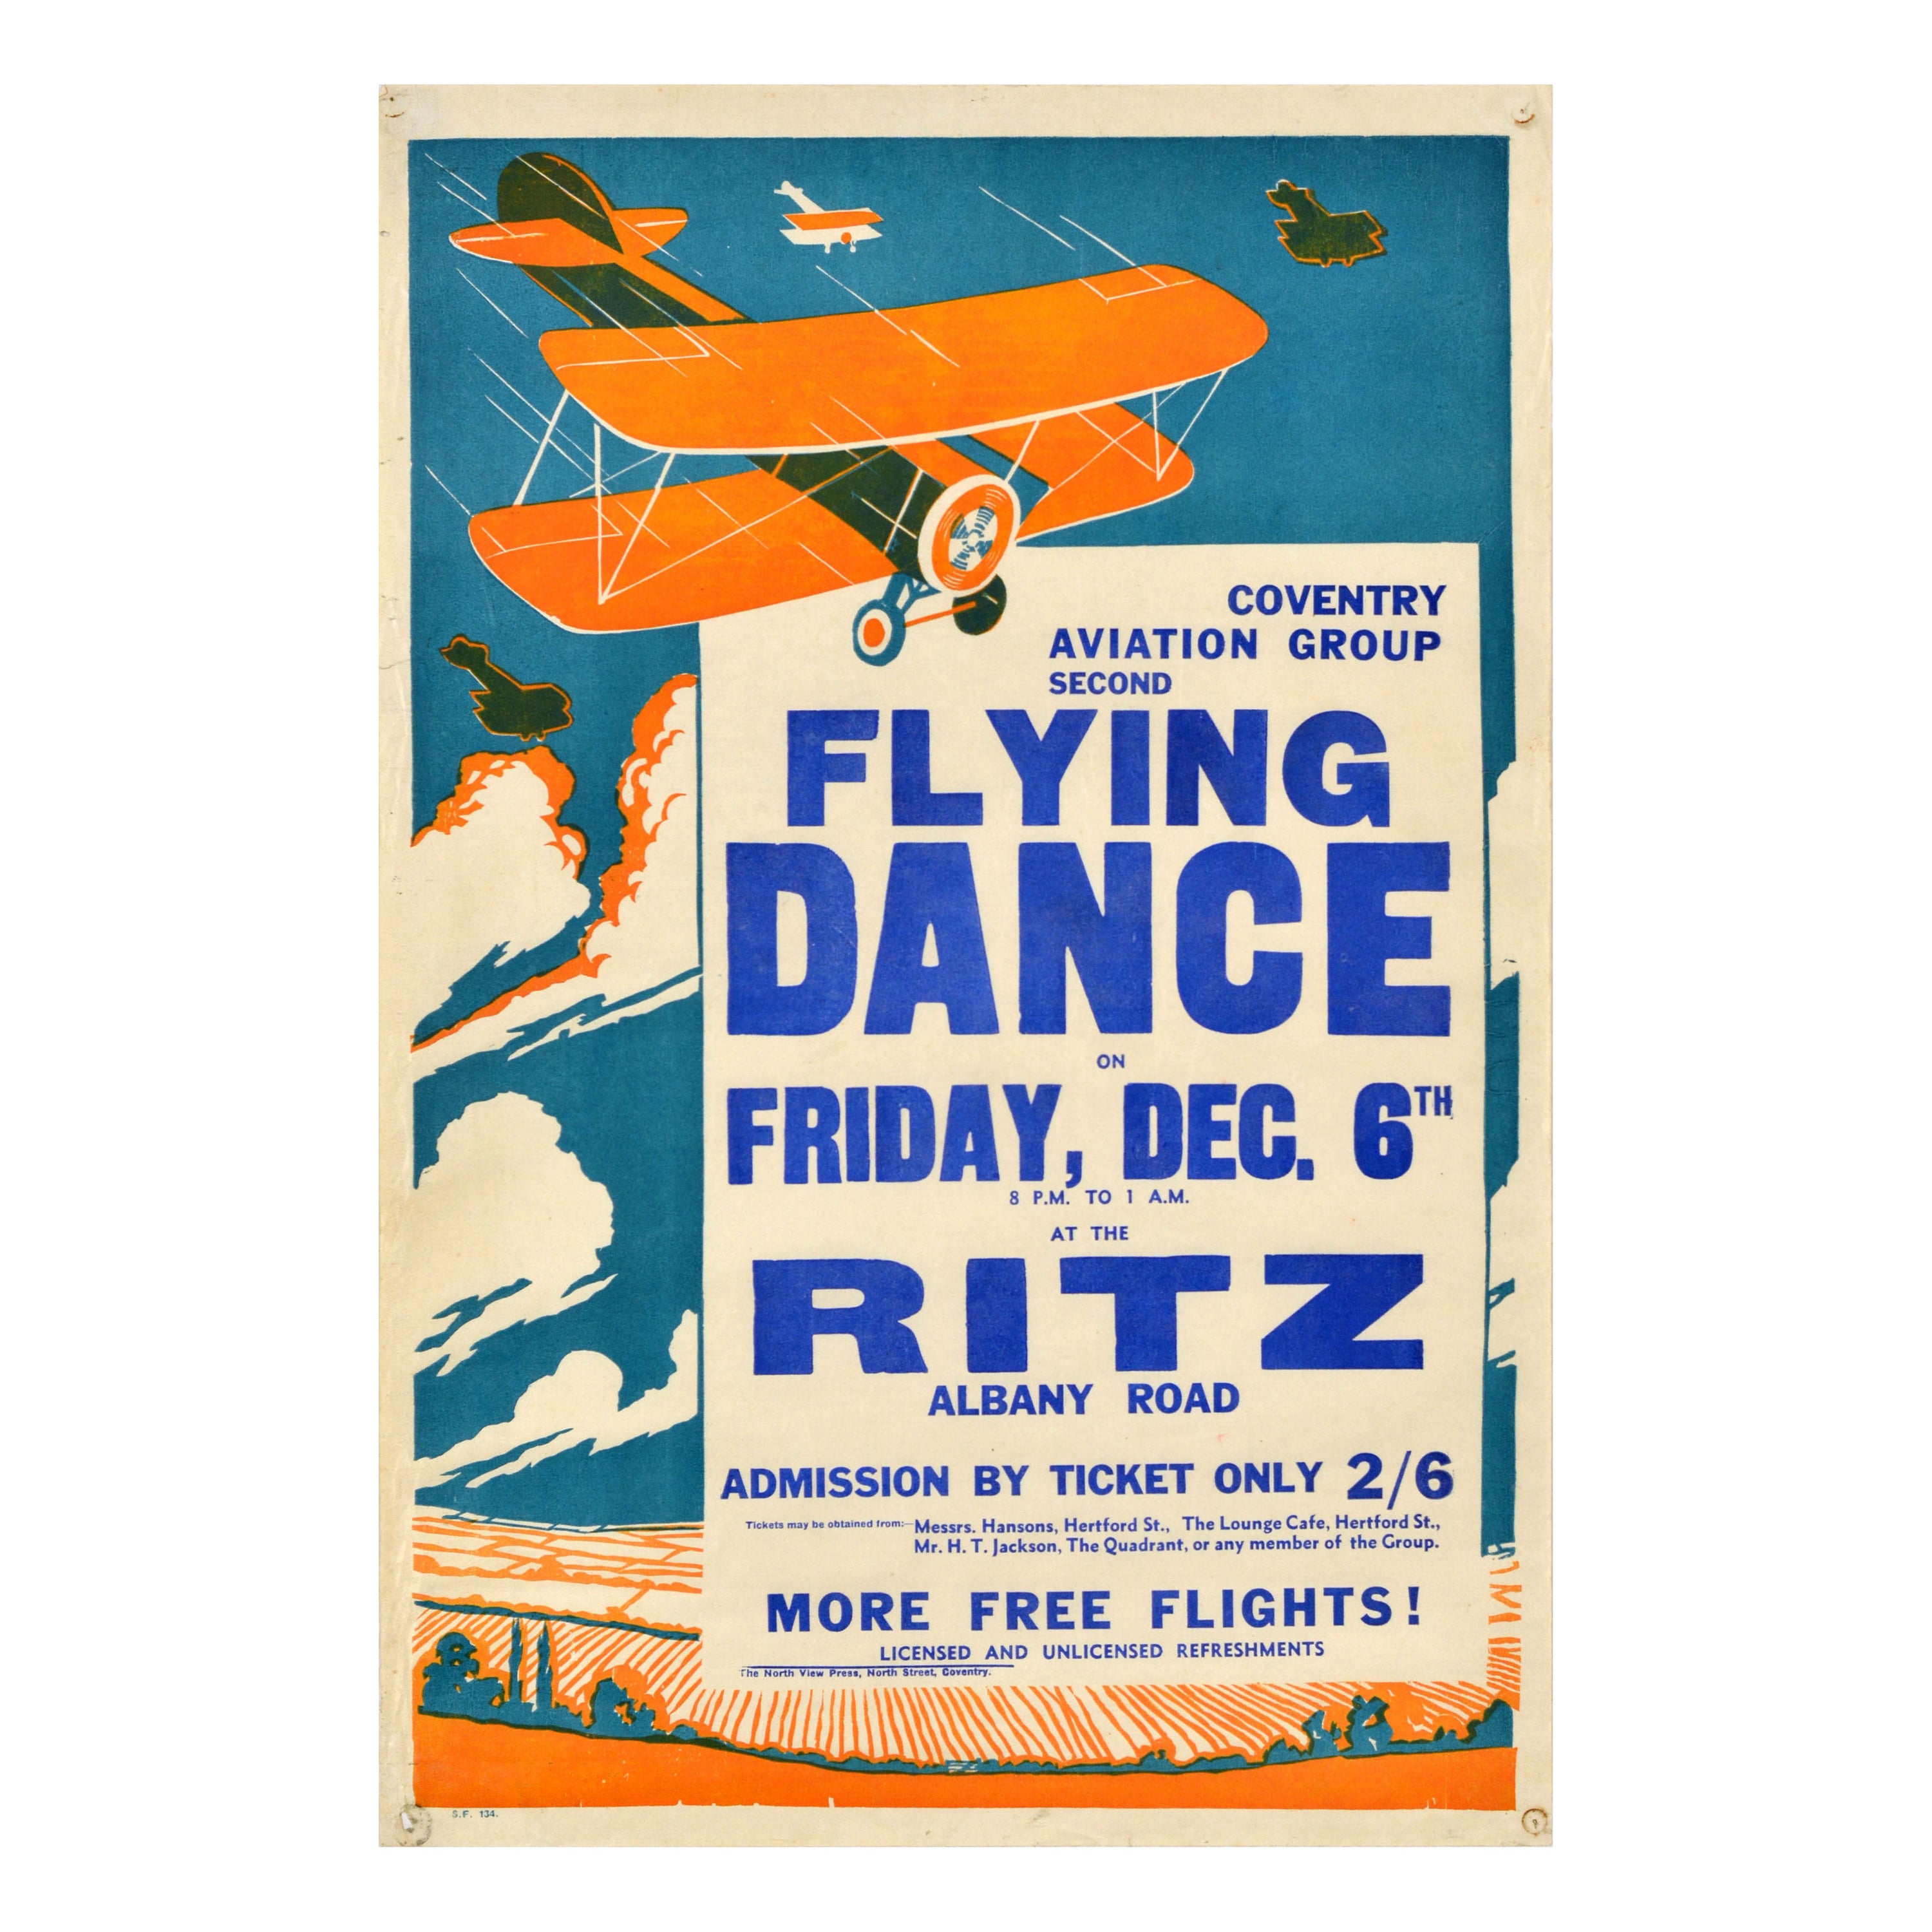 Original Vintage Advertising Poster Flying Dance Coventry Aviation Group Plane For Sale